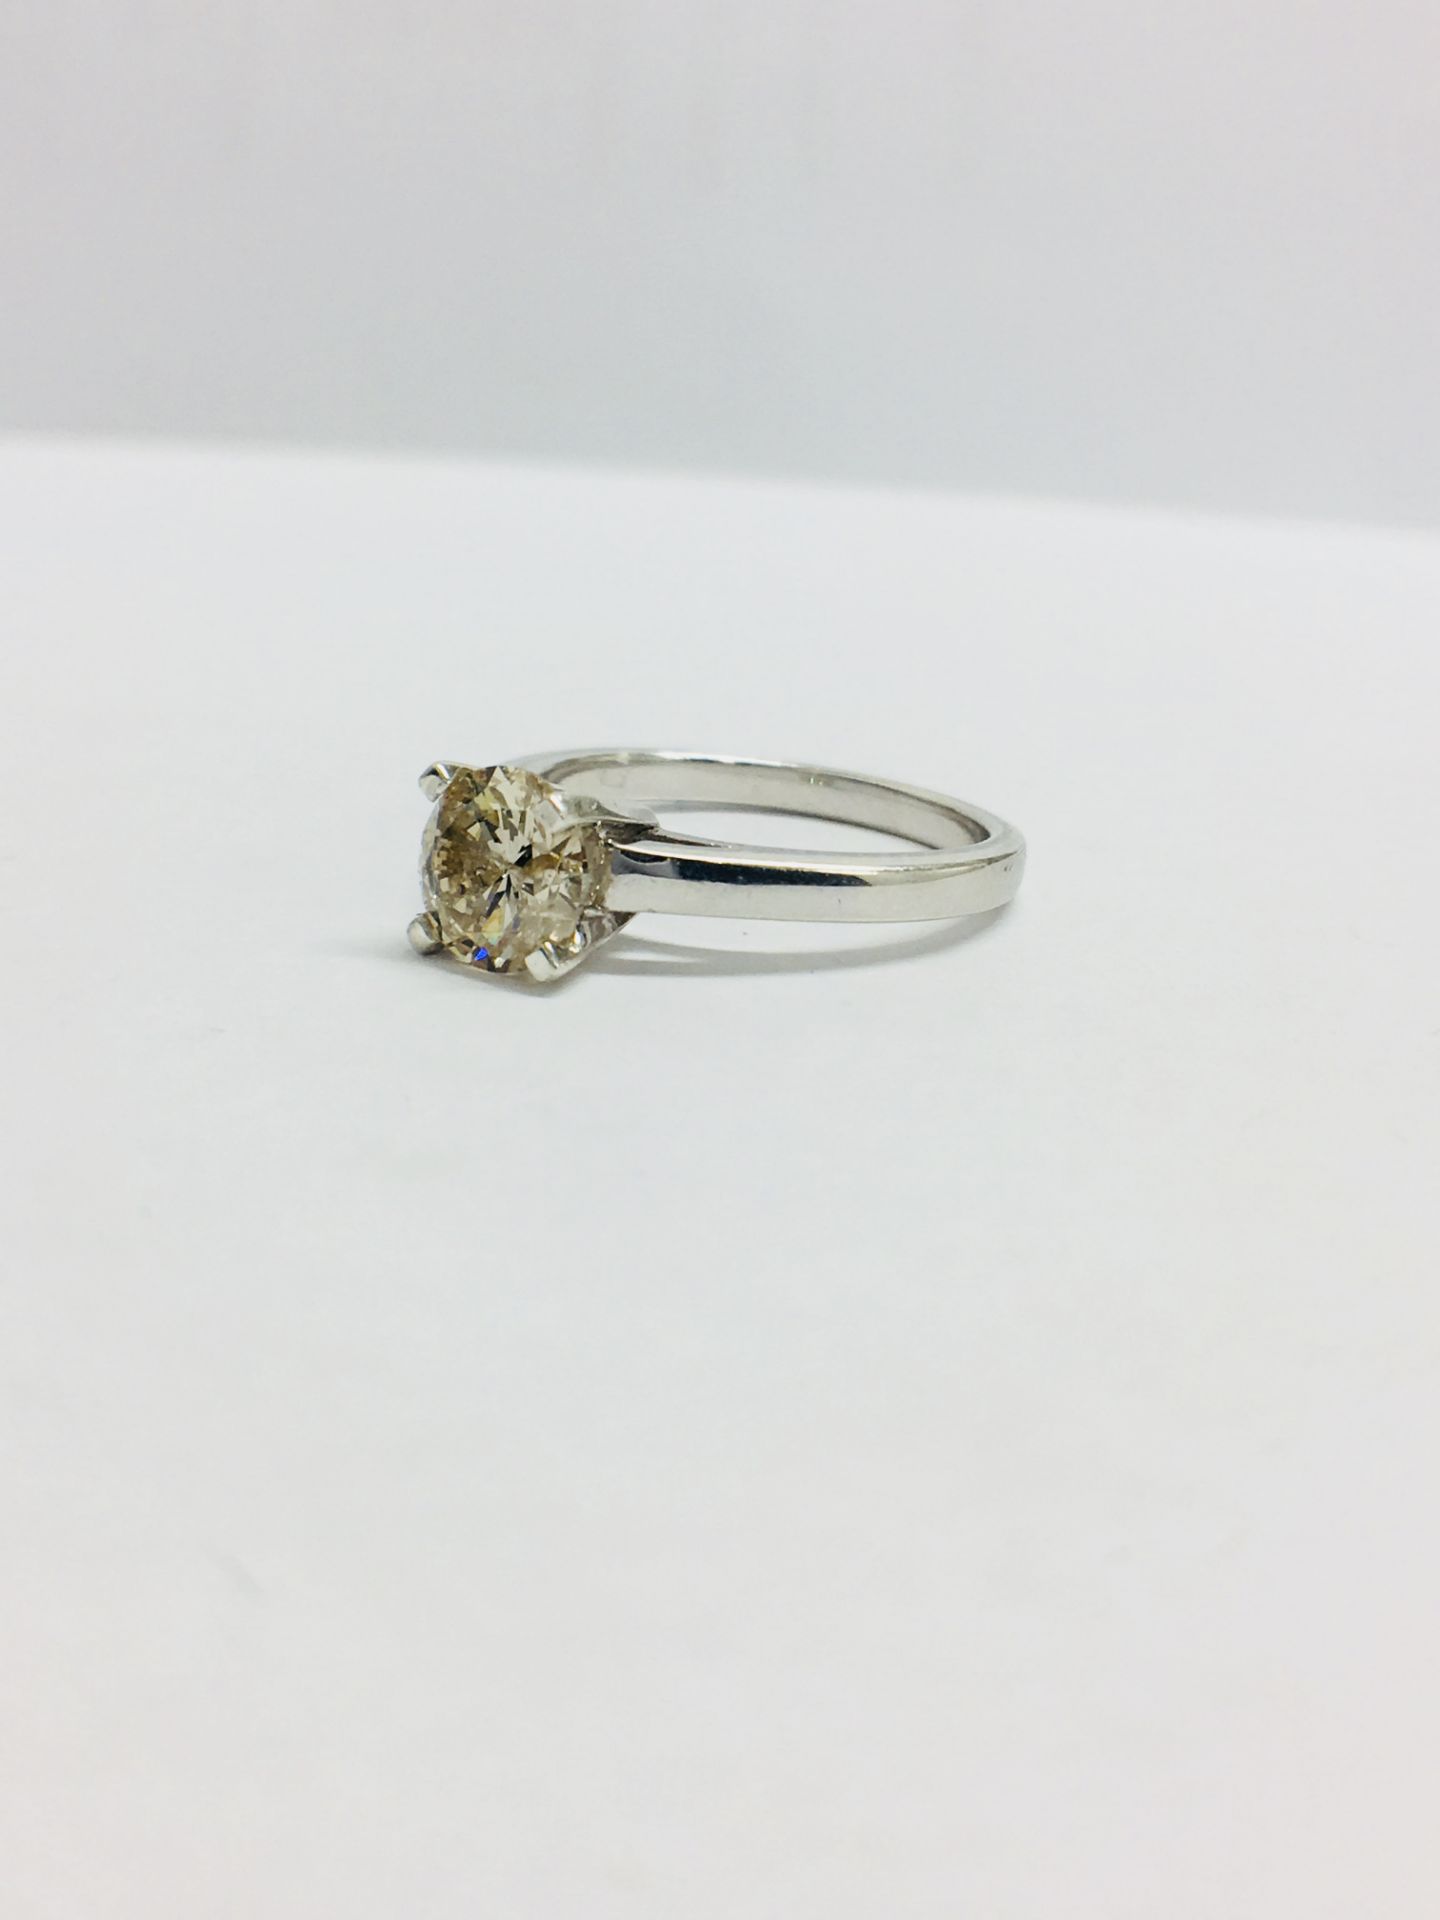 1.02Ct Diamond Solitaire Ring Set In 18Ct Gold. - Image 2 of 8